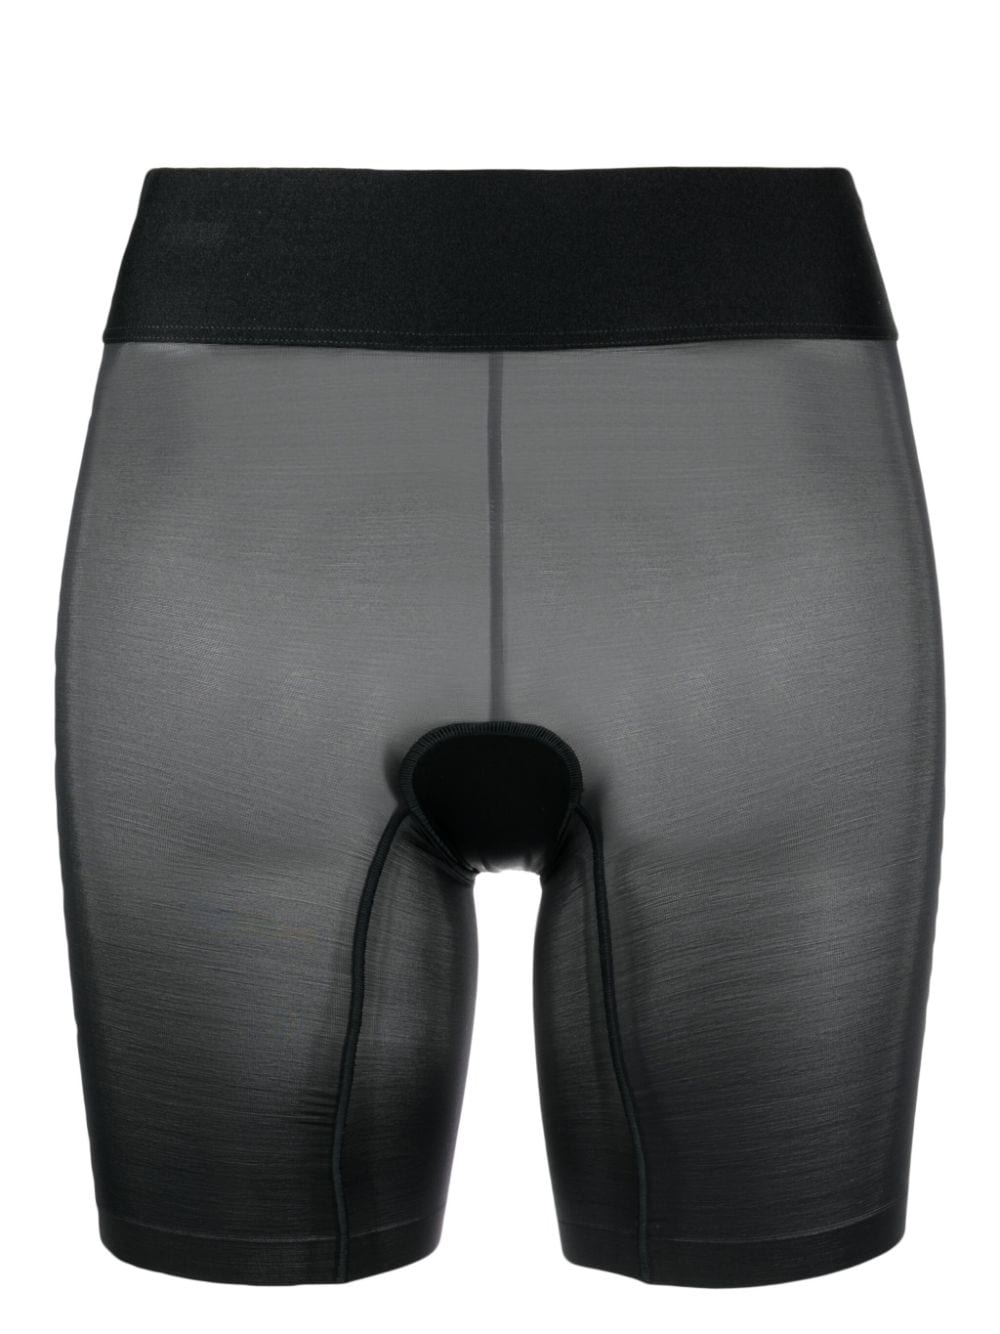 Wolford Touch Control sheer shorts - Black von Wolford